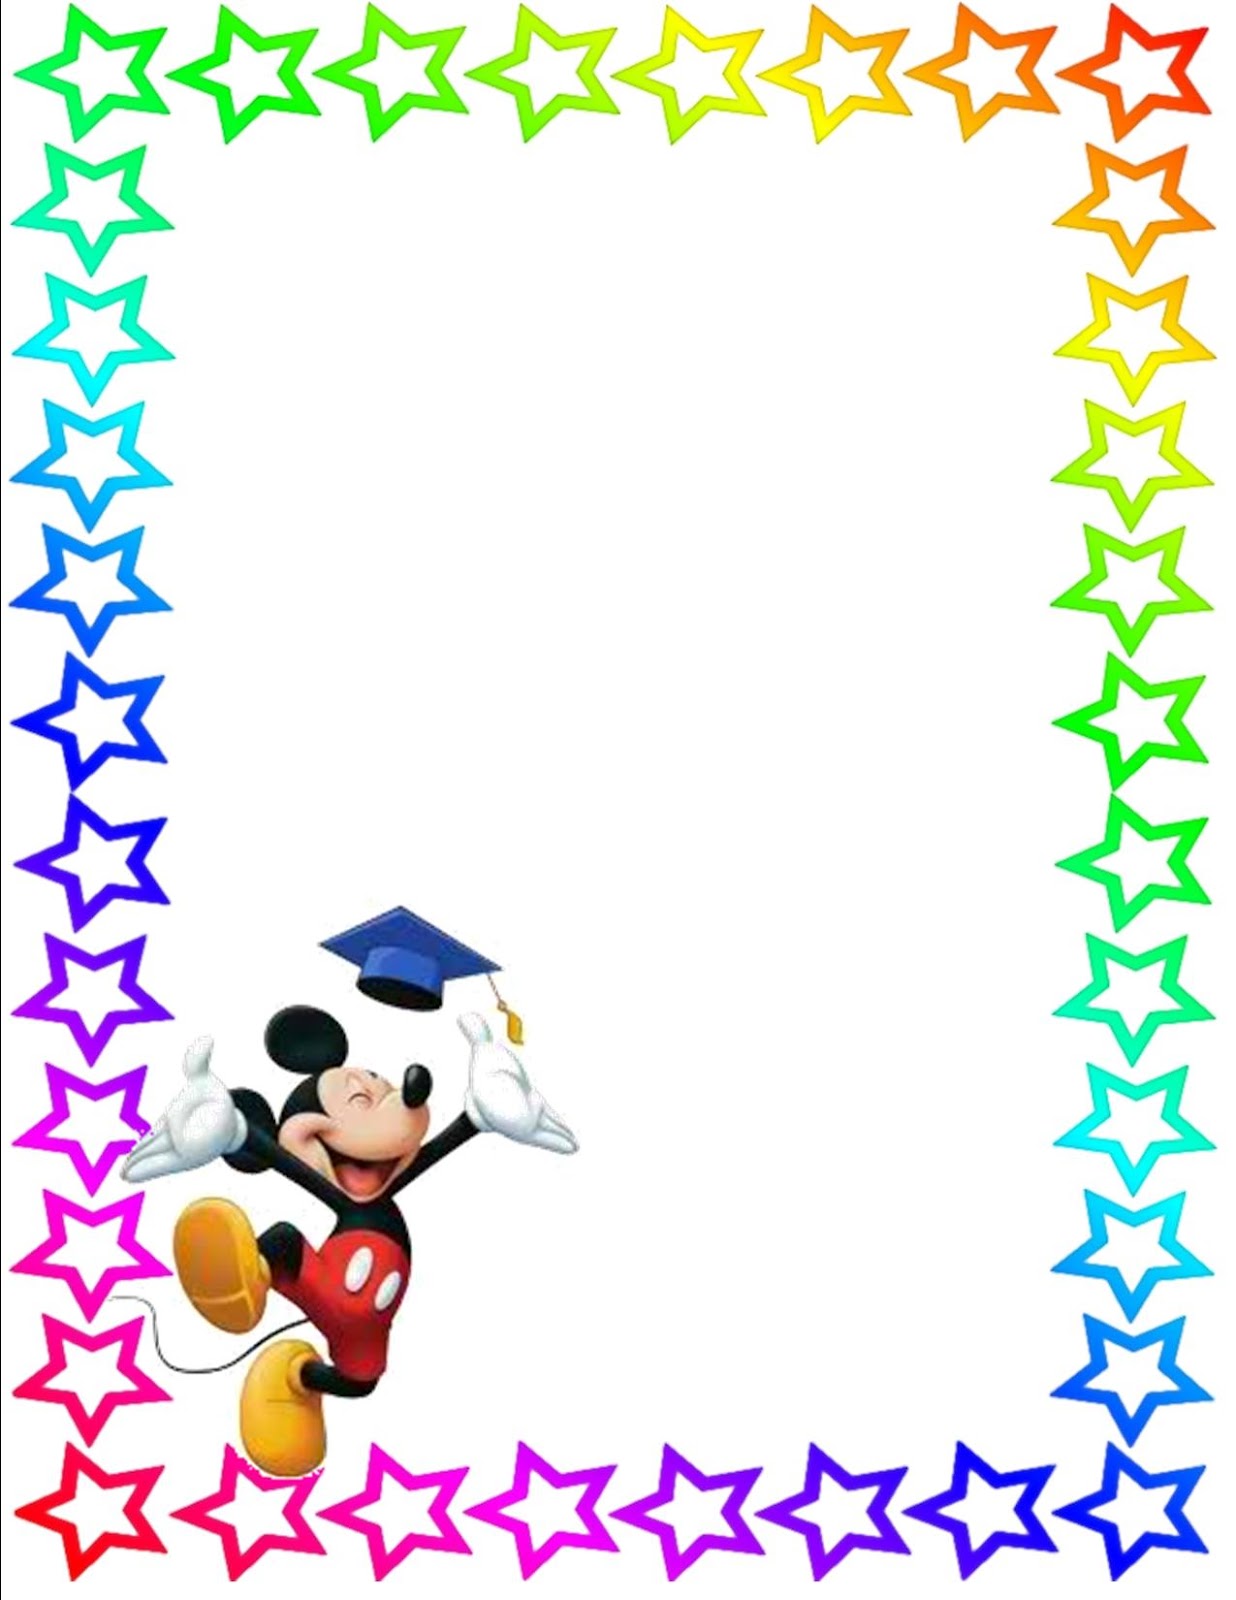 Displaying 17  Images For   Disney Borders Clip Art